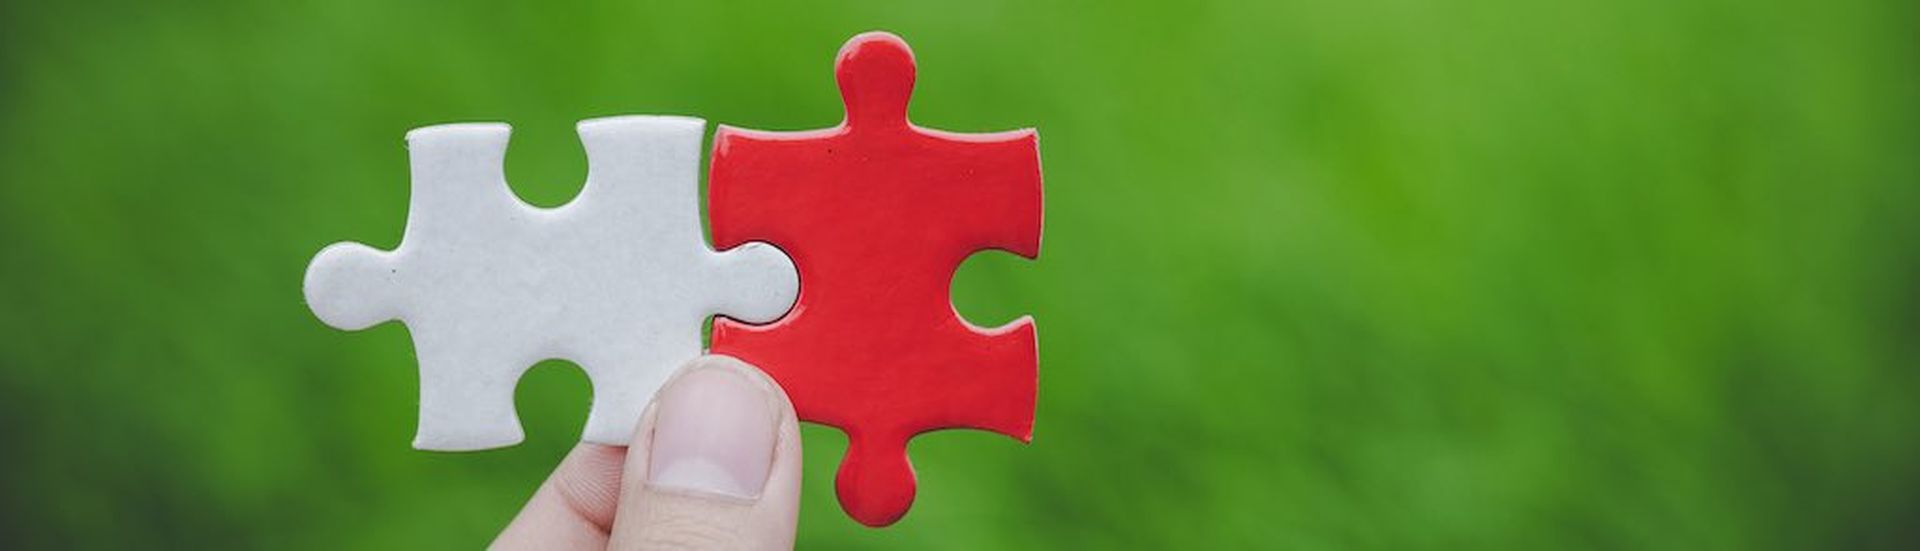 Businessmen join hands in pieces of white and red jigsaw puzzles, teamwork concepts, business solutions, success concepts and strategies, links and connections.